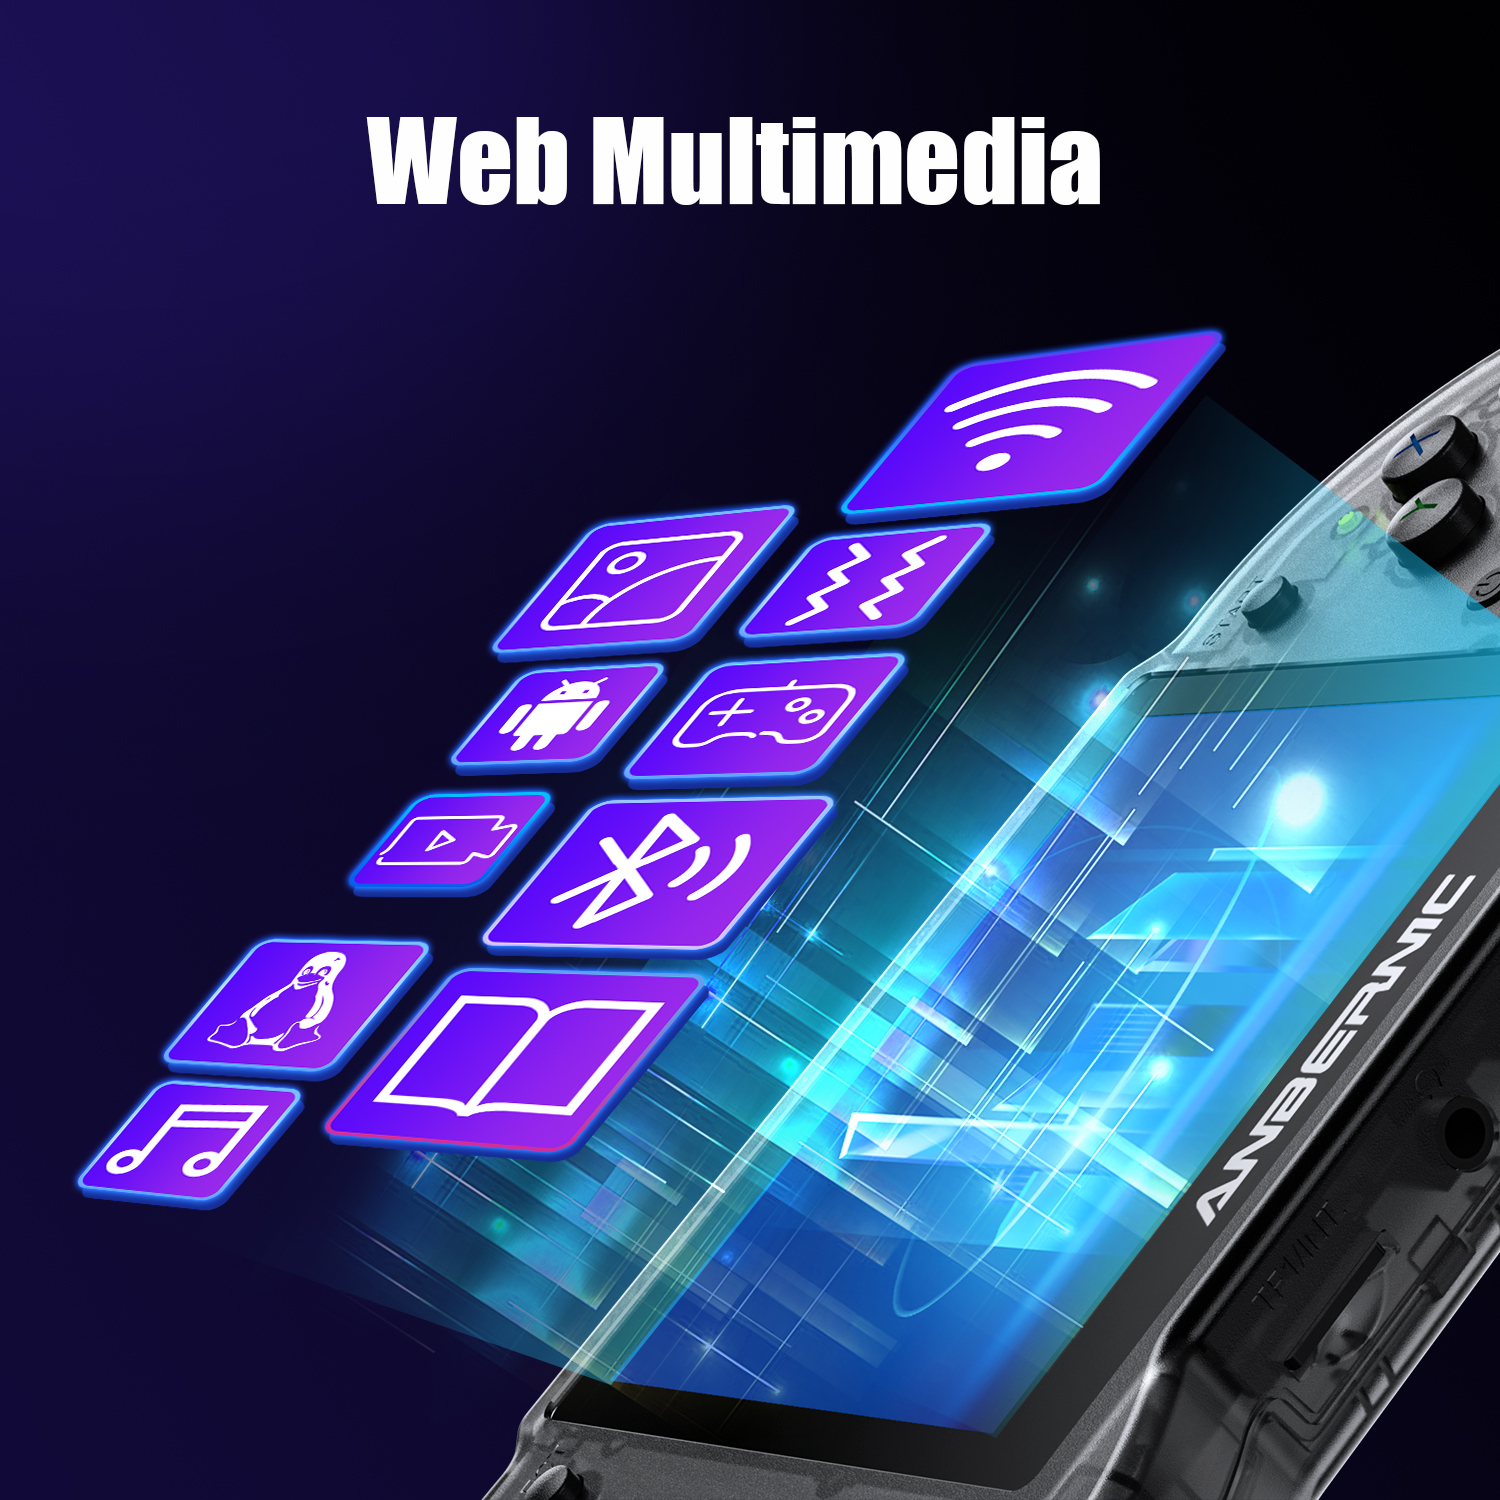 RG353P support Web Multimedia